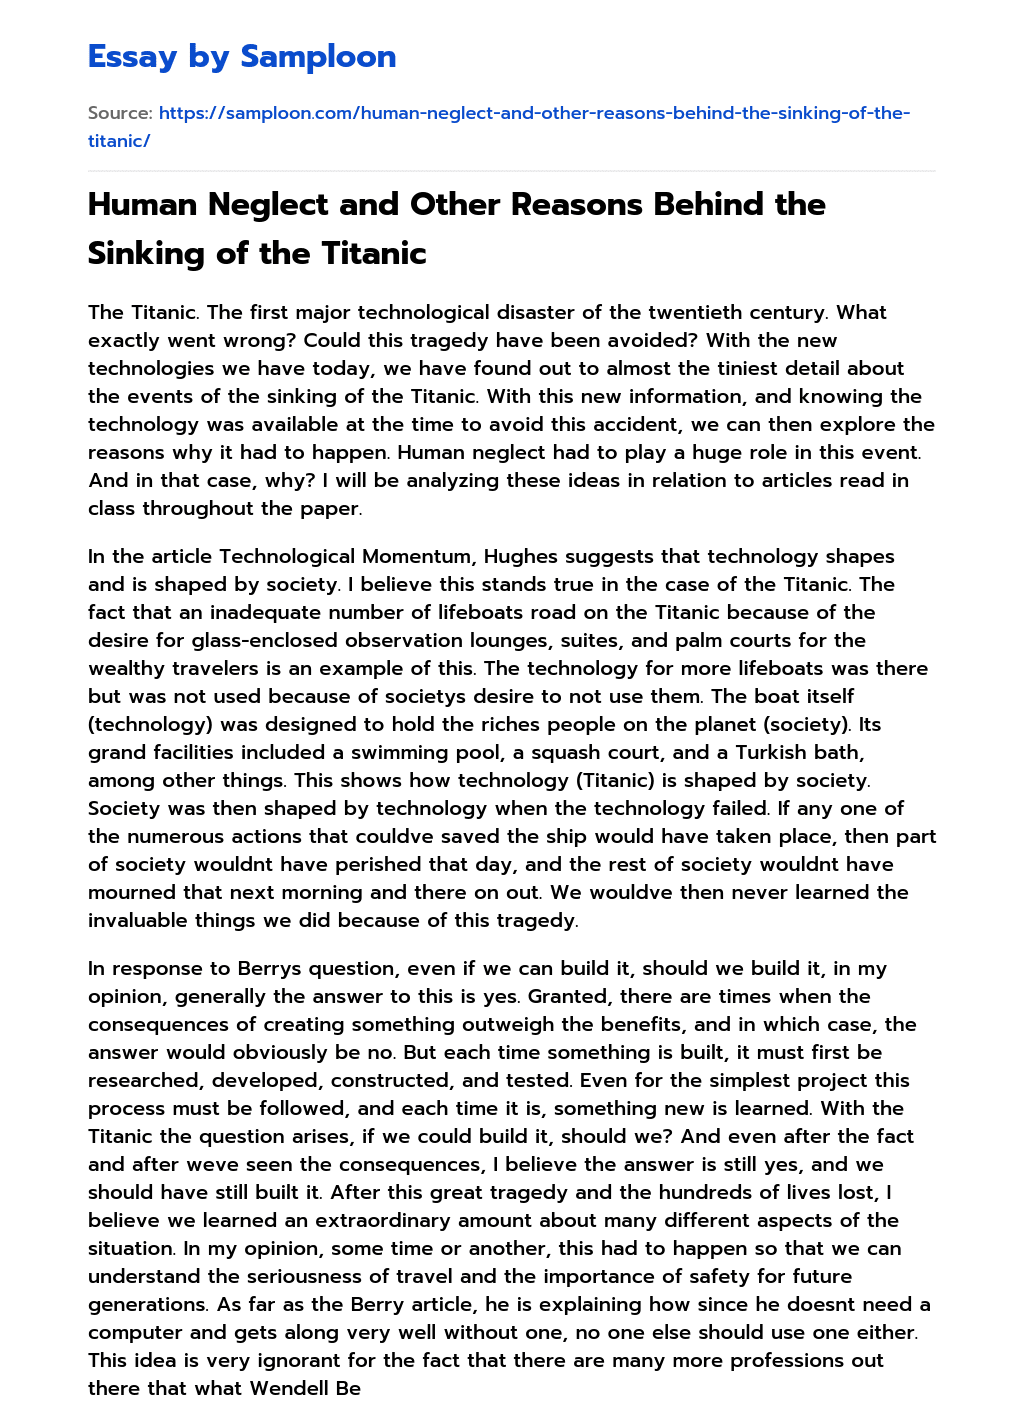 Human Neglect and Other Reasons Behind the Sinking of the Titanic essay